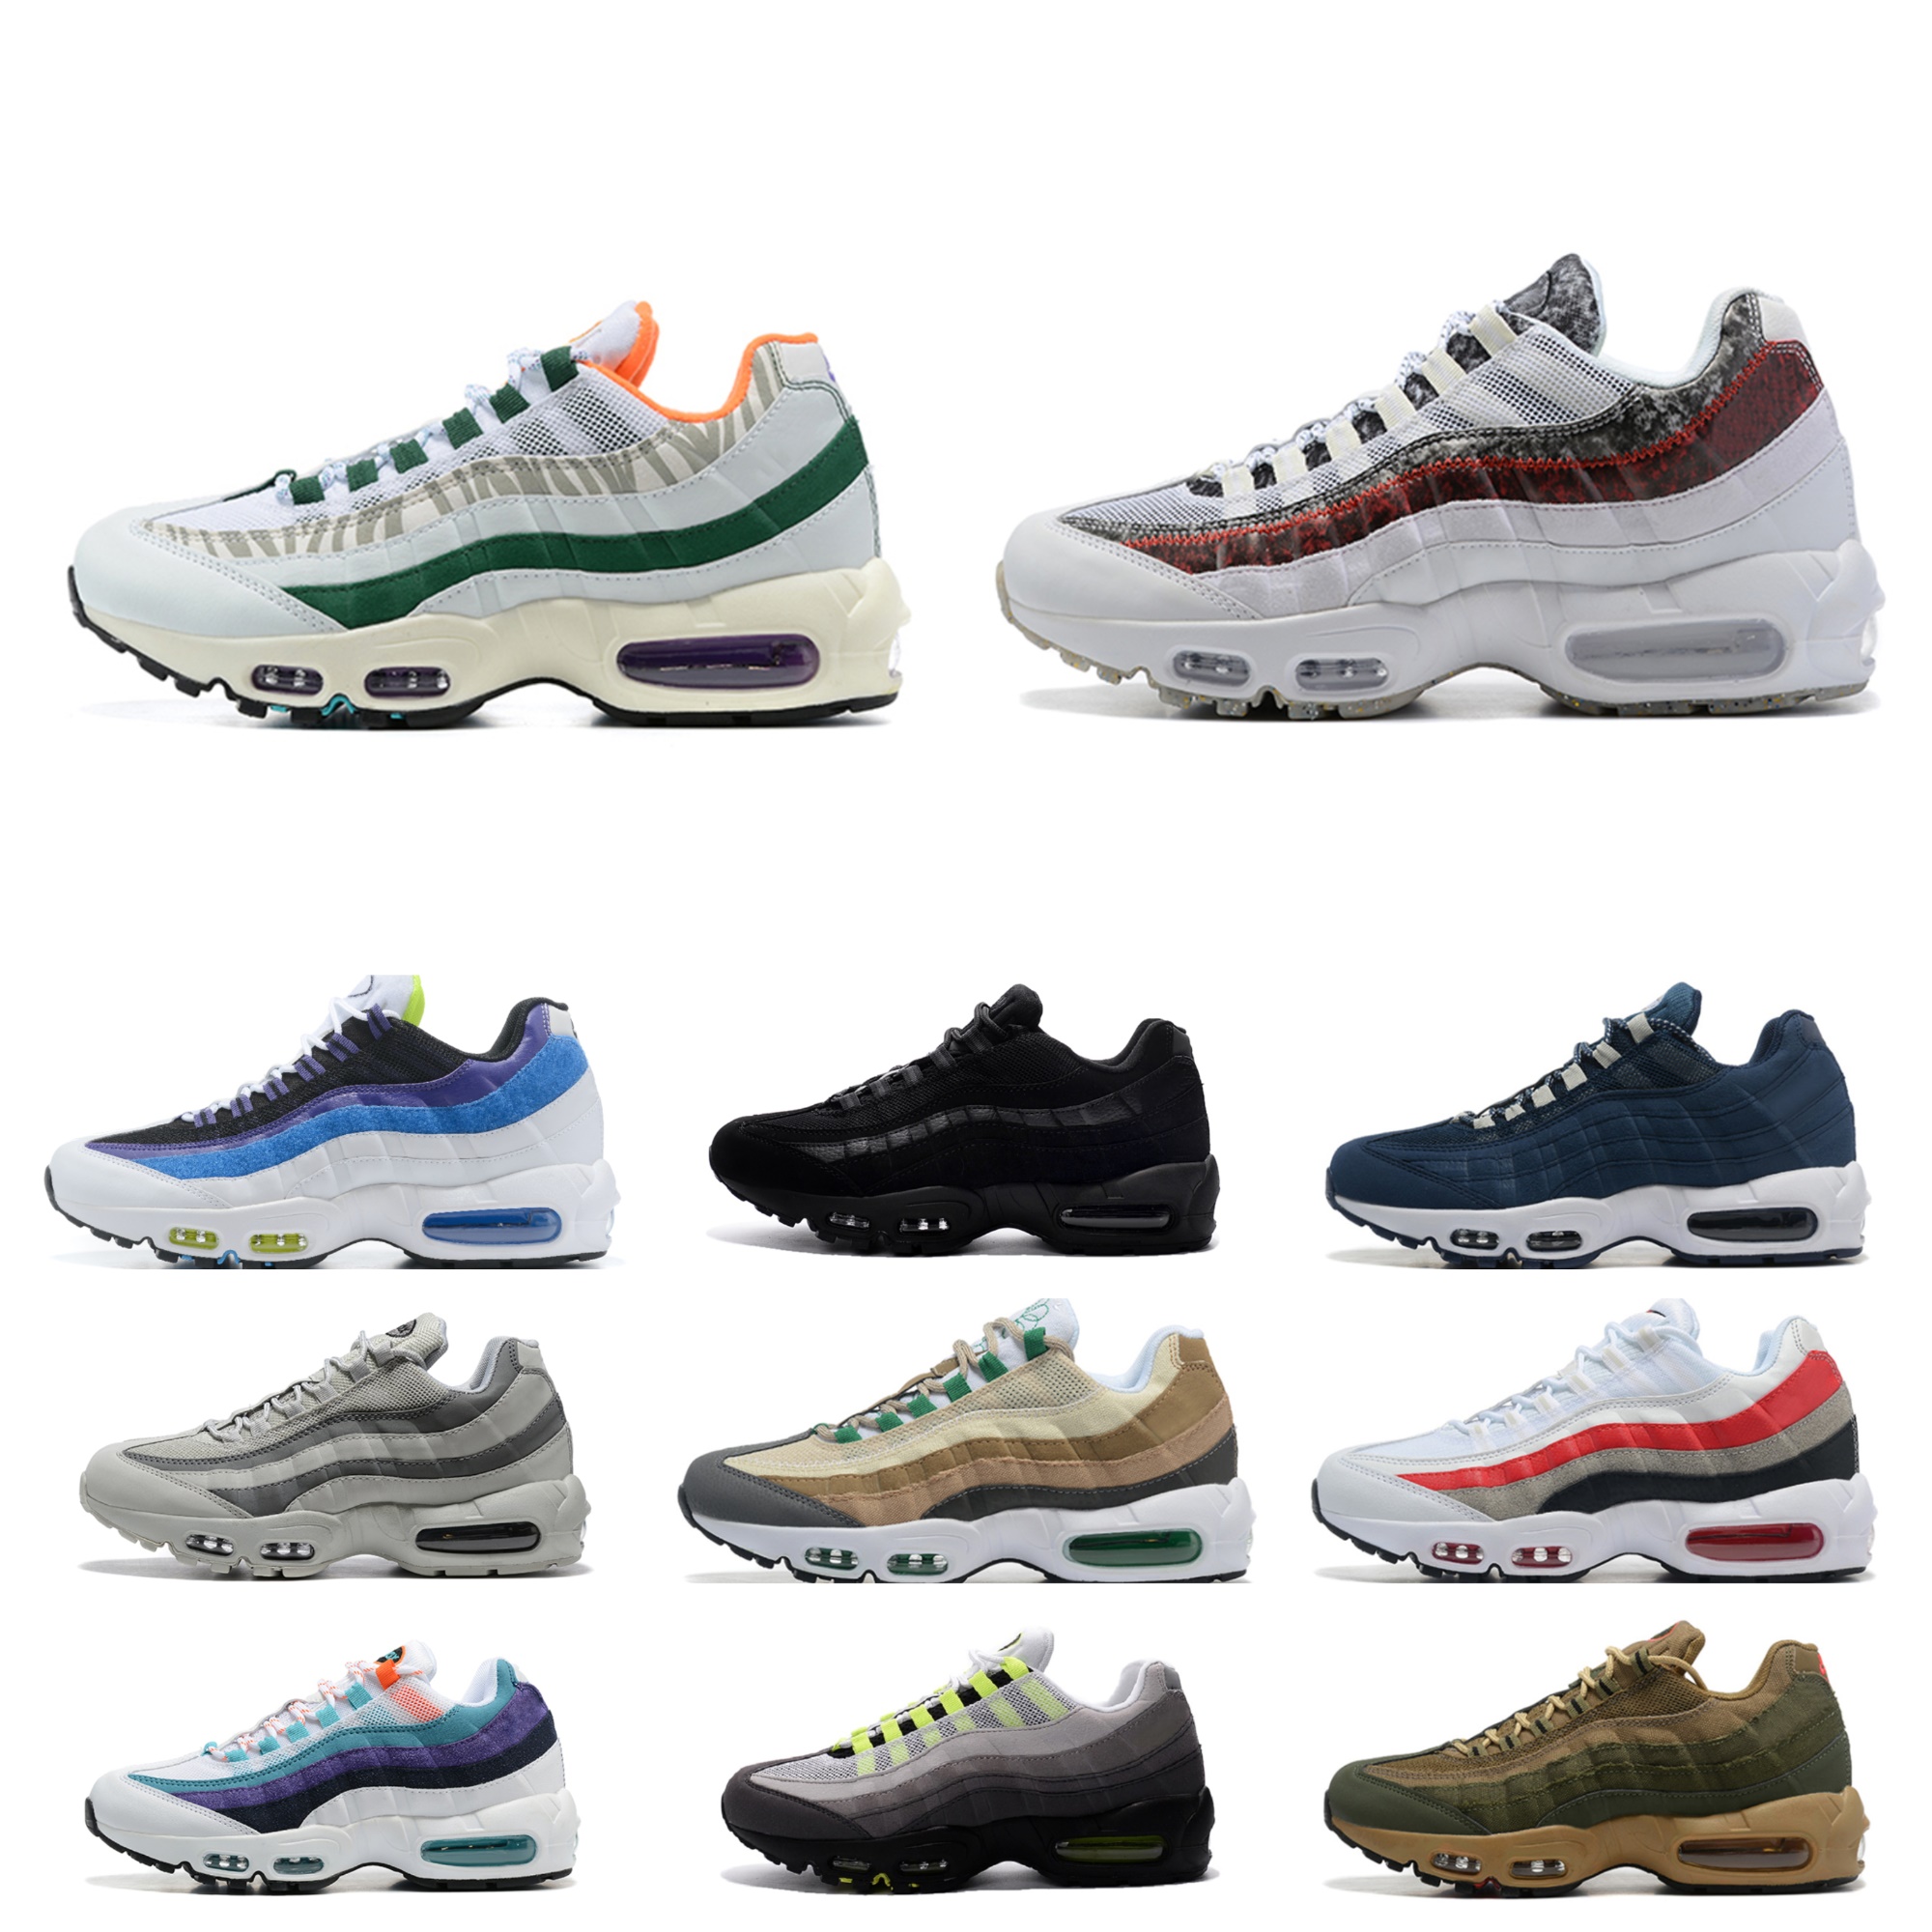 

OG 95 airmaxs Running Shoes Mens Dark Army Chaussures 95s air Neon White Worldwide Triple Black Reflective Volt Earth Day Navy Blue Grape Snakeskin Designer Sneakers, Bubble package bag